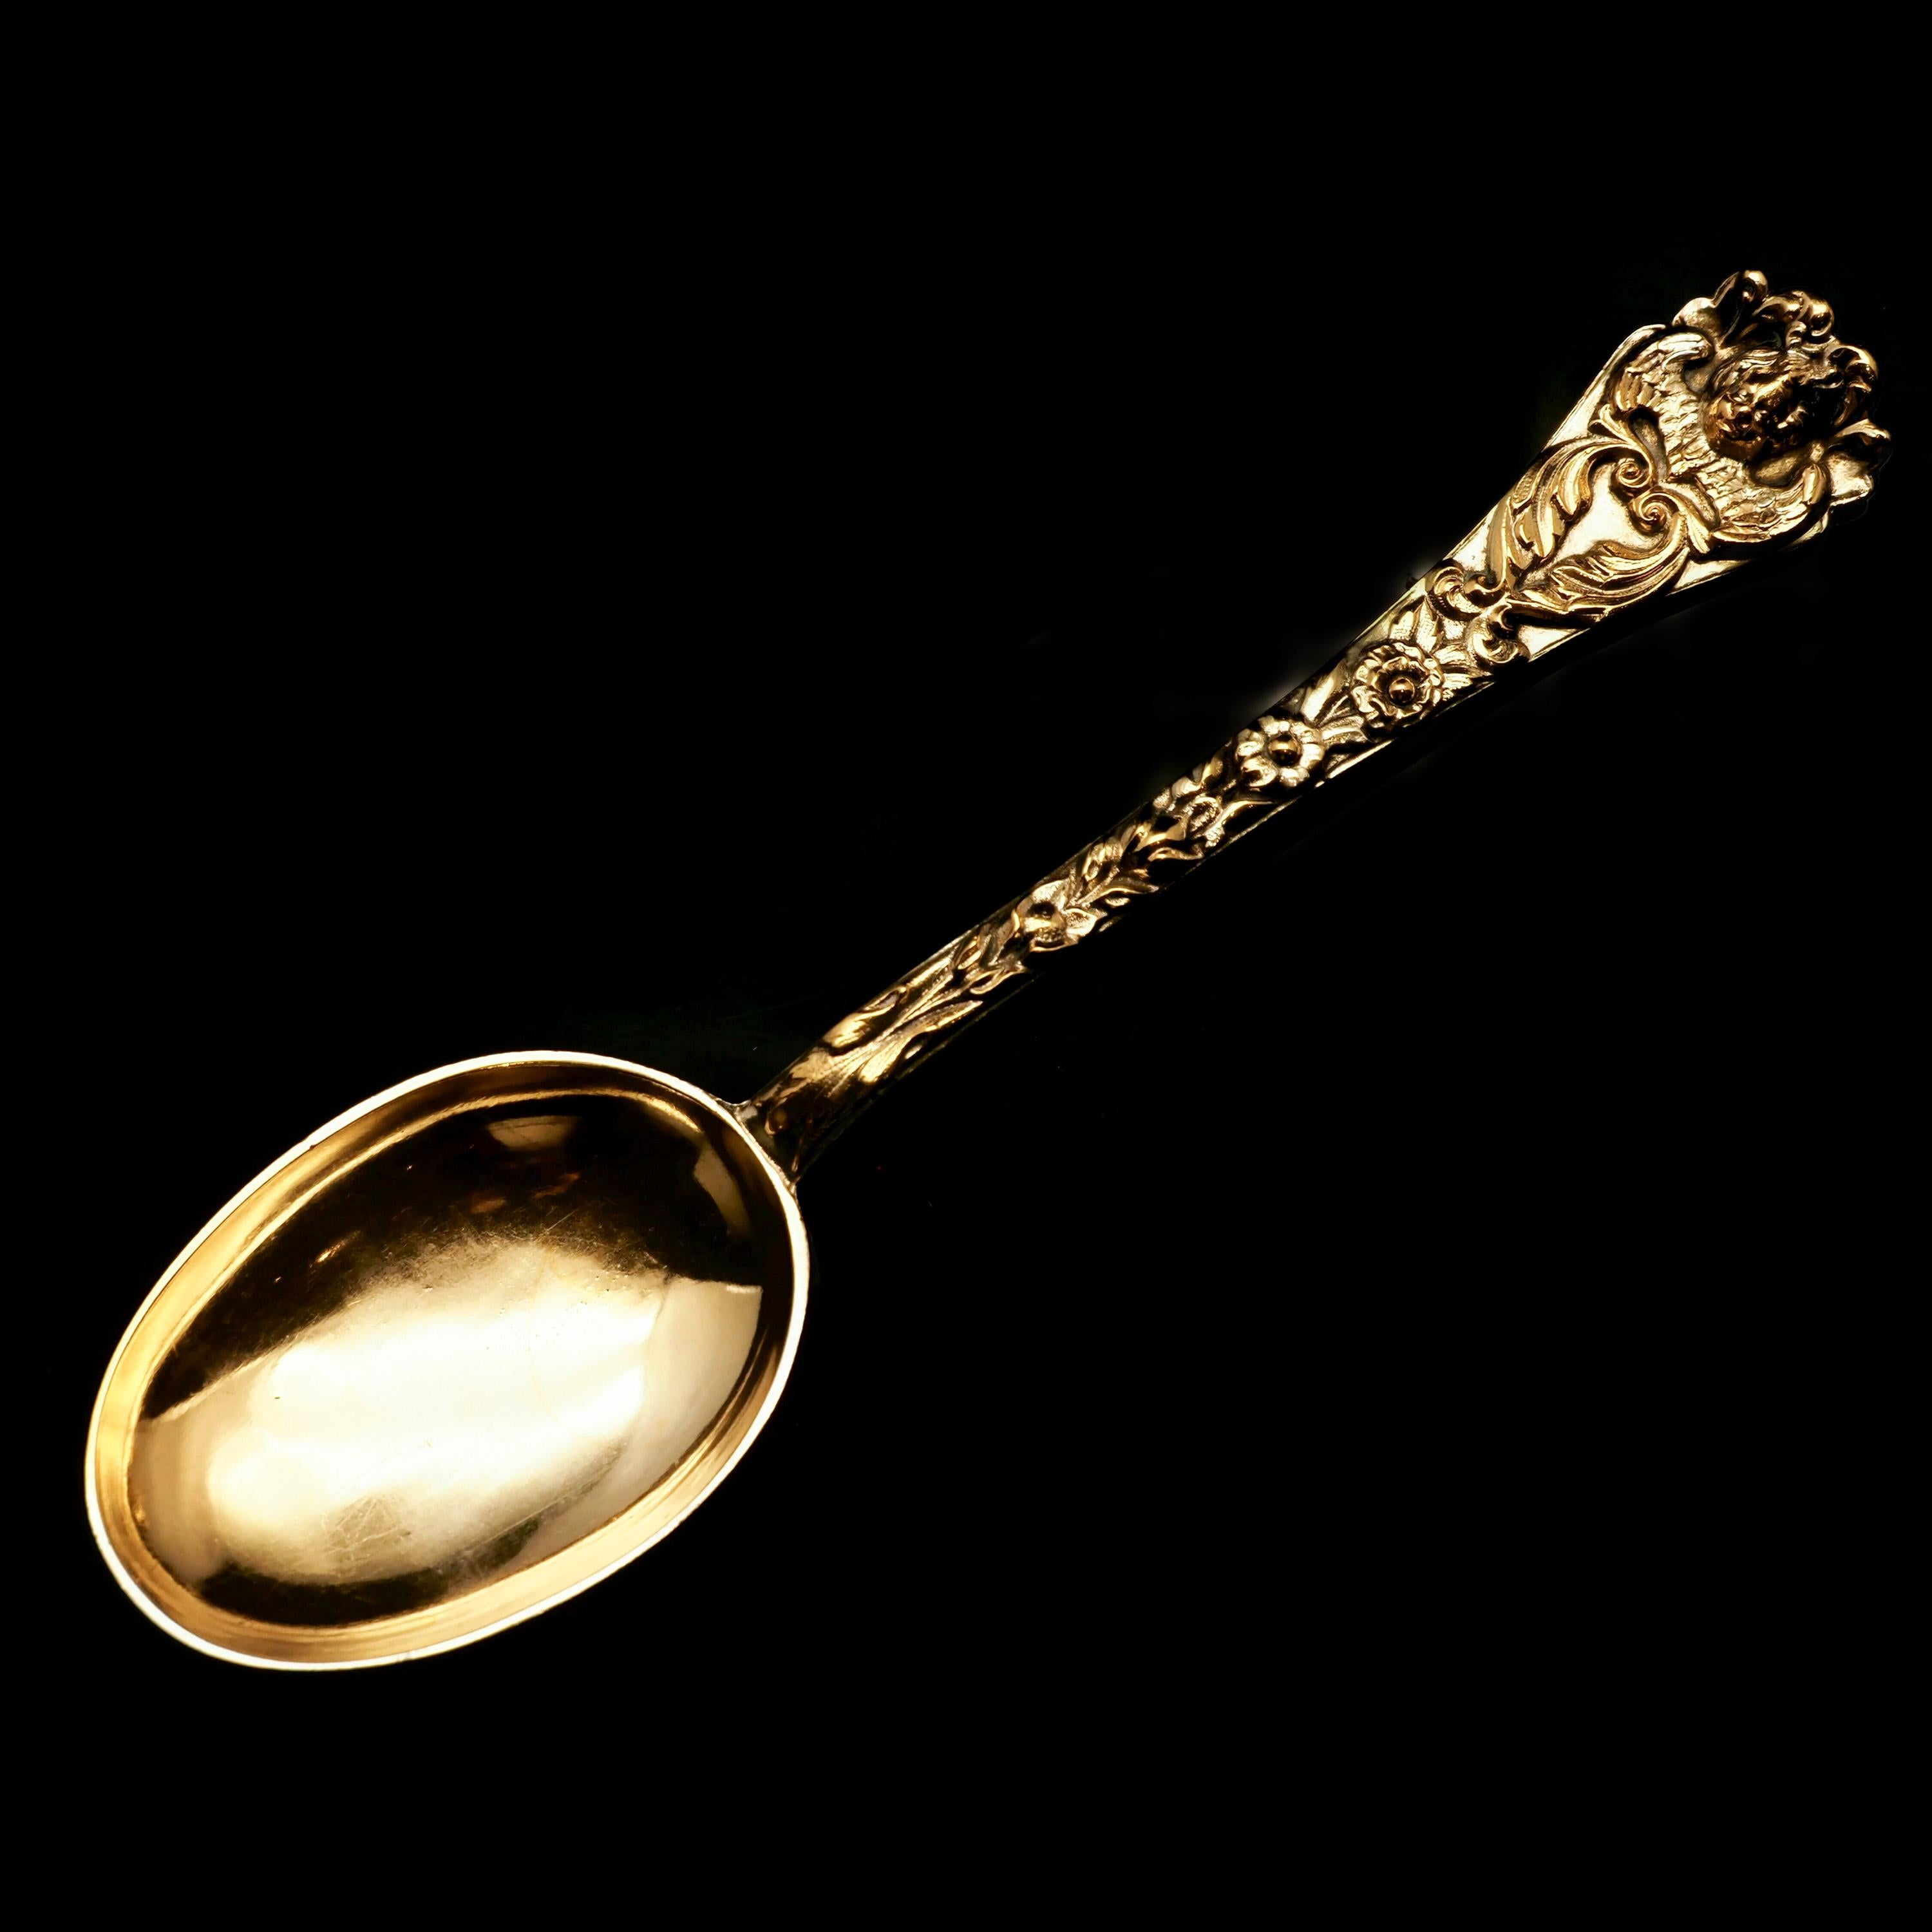 Antique Set of 4 Solid Silver Gilt Spoons Highly Embossed, Henry William Curry For Sale 2